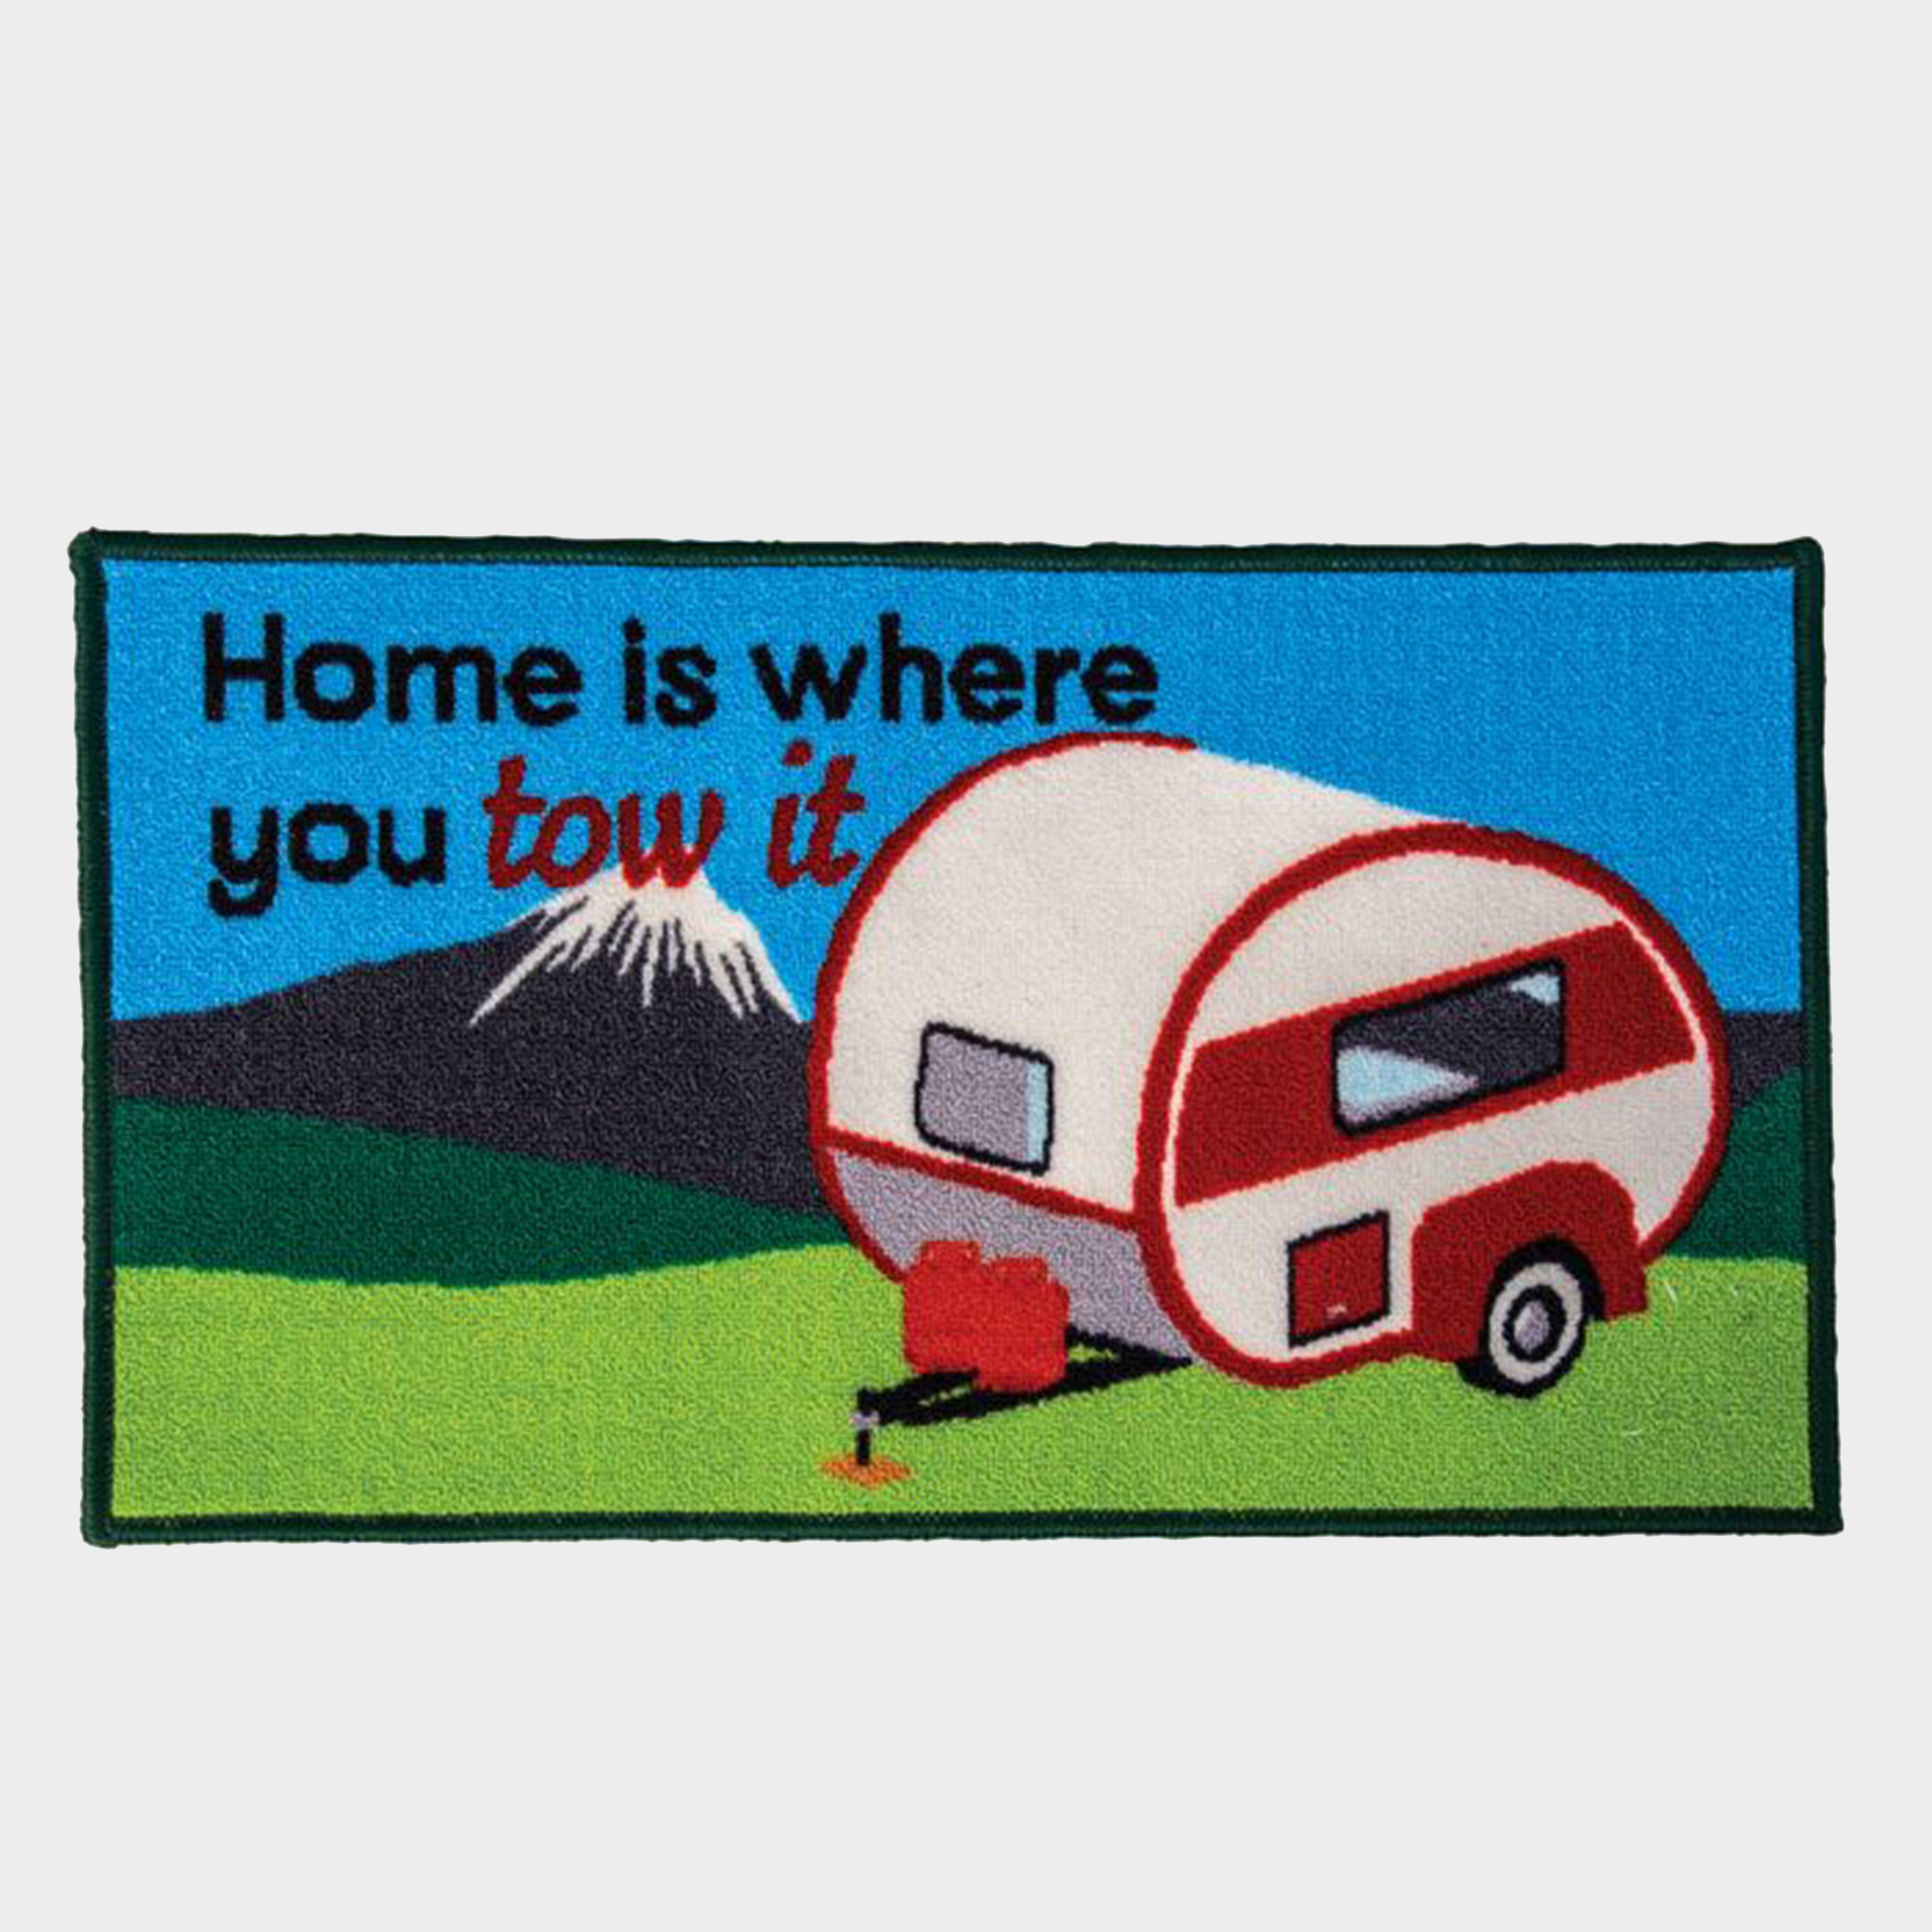 Quest home Is Where You Park It Mat - Multi/home  Multi/home